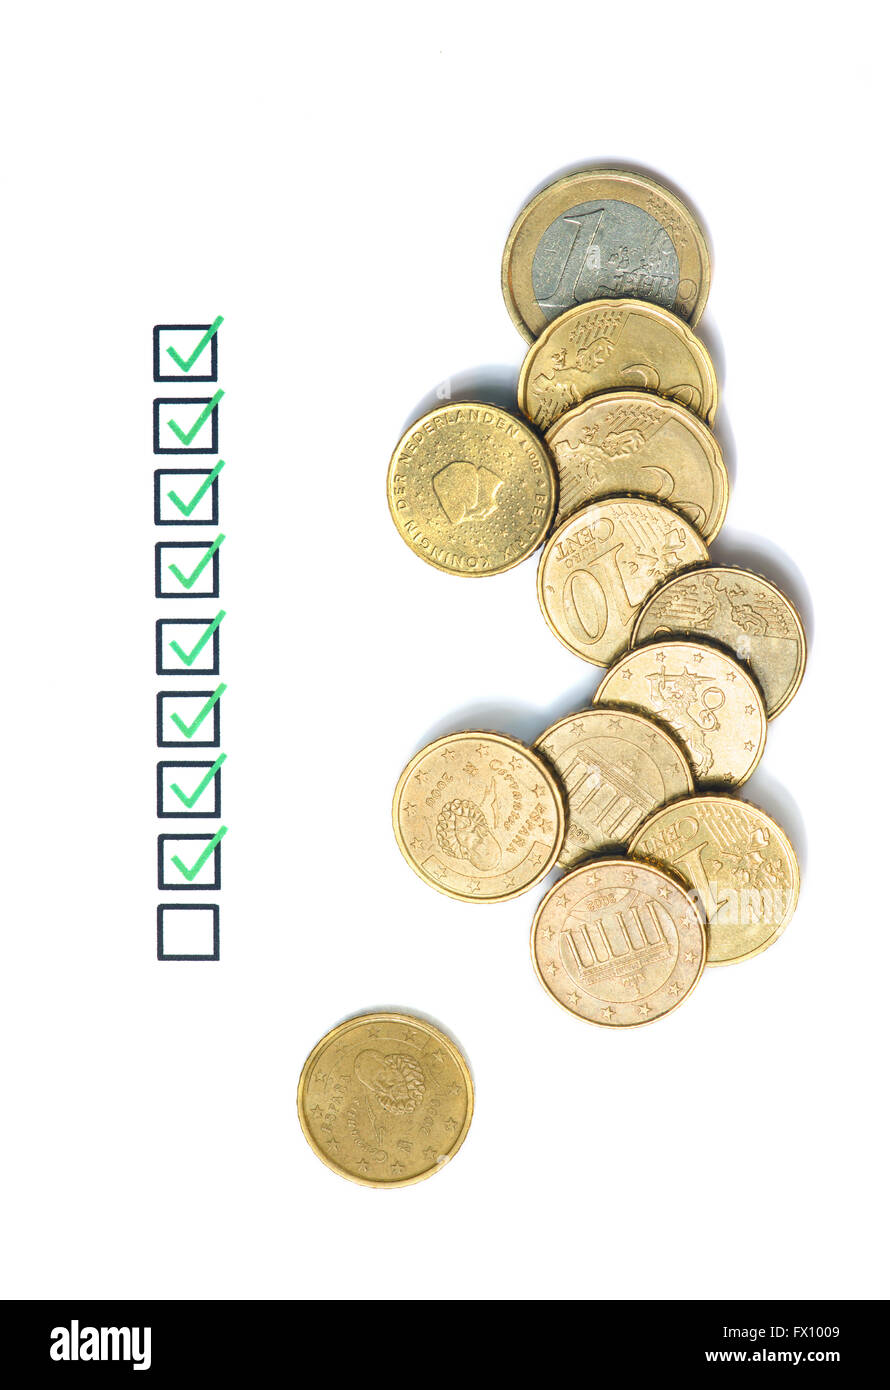 Questionnaire business concept and several euro coins. Stock Photo